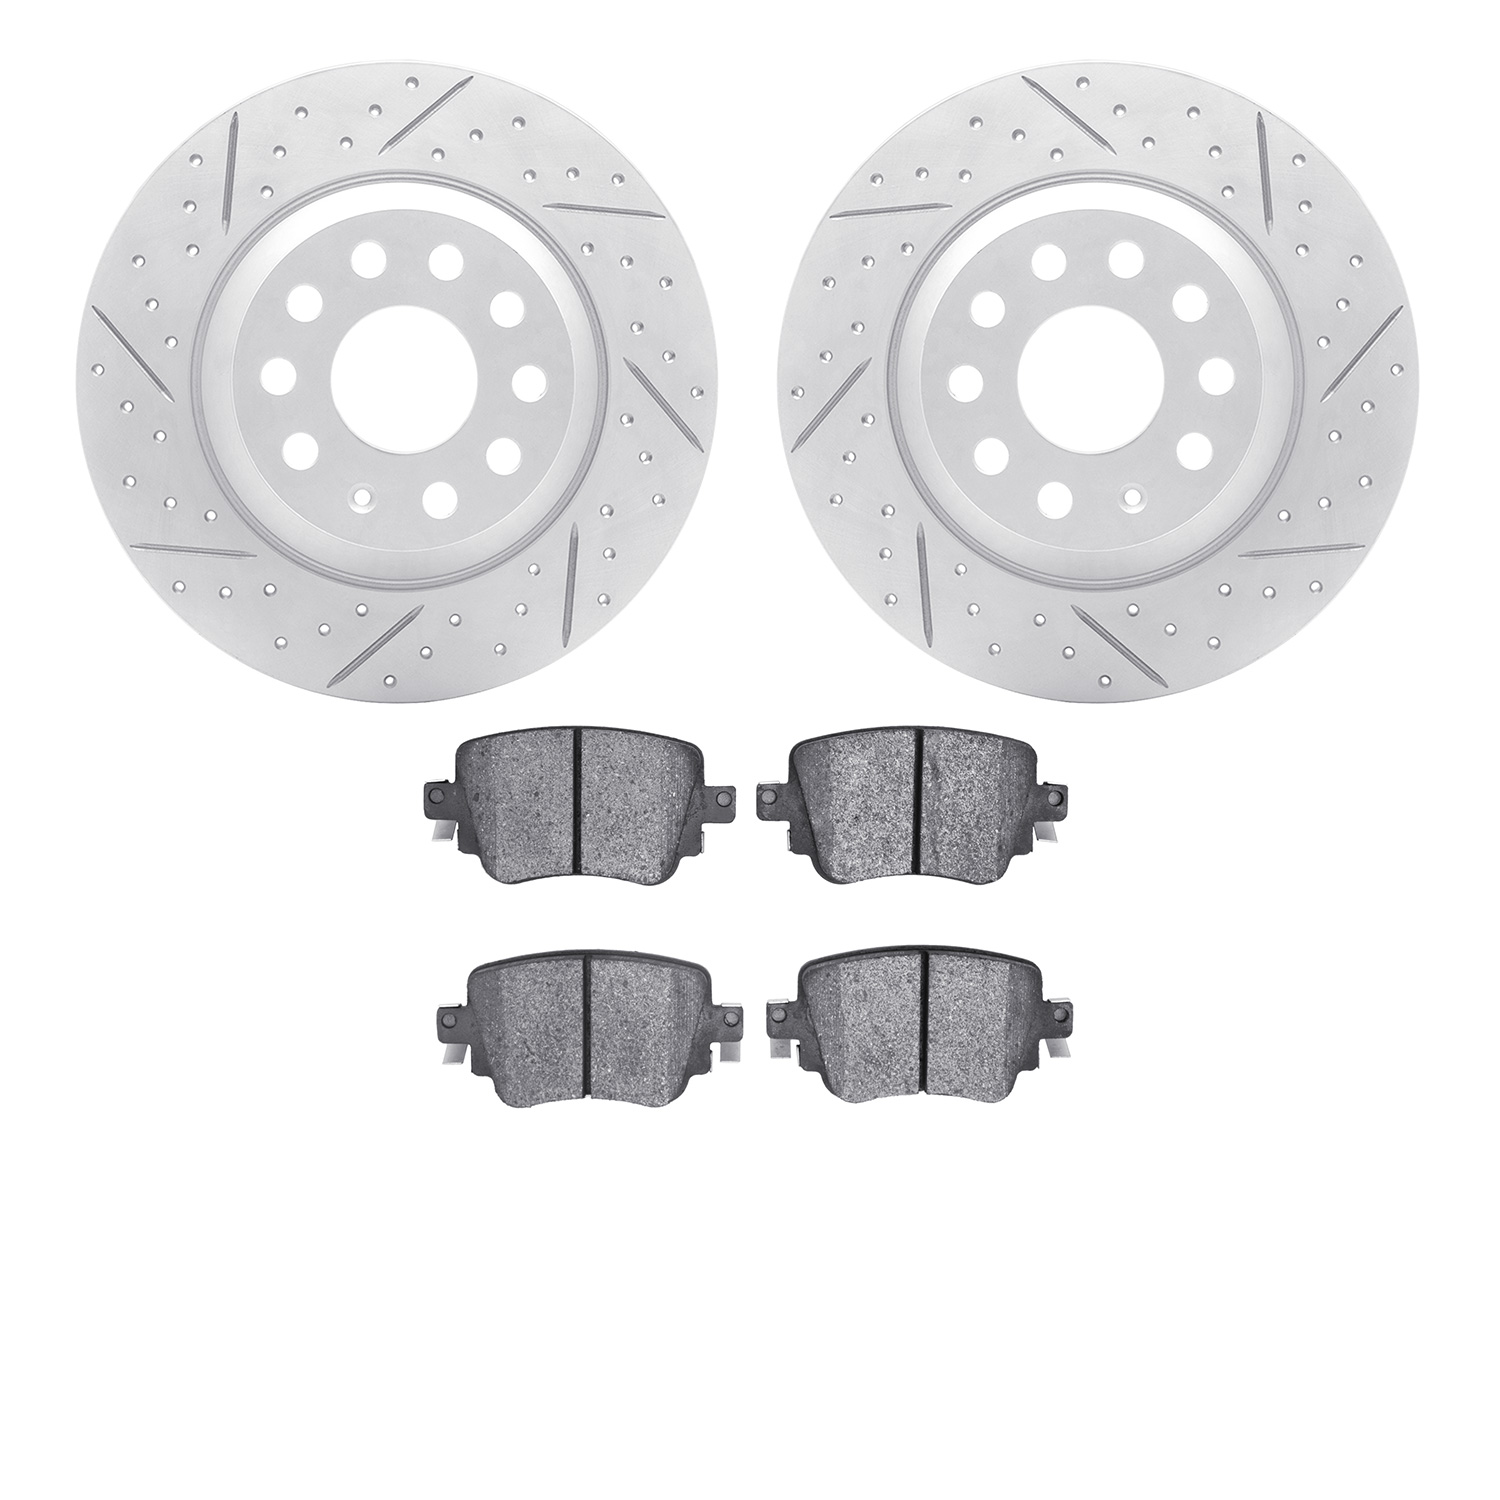 2702-73127 Geoperformance Drilled/Slotted Brake Rotors with Active Performance Pads Kit, 2016-2018 Audi/Volkswagen, Position: Re